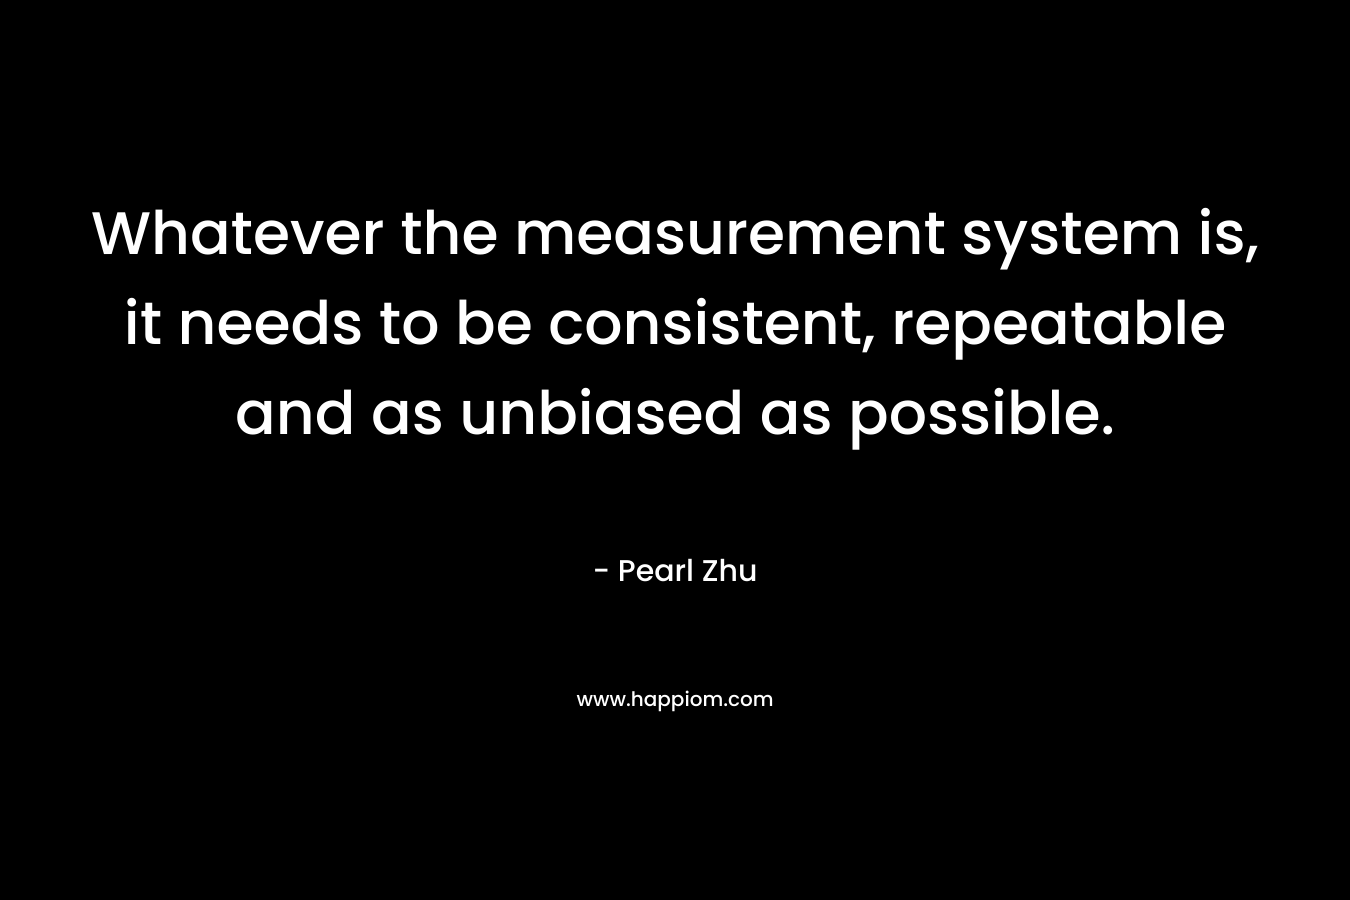 Whatever the measurement system is, it needs to be consistent, repeatable and as unbiased as possible.